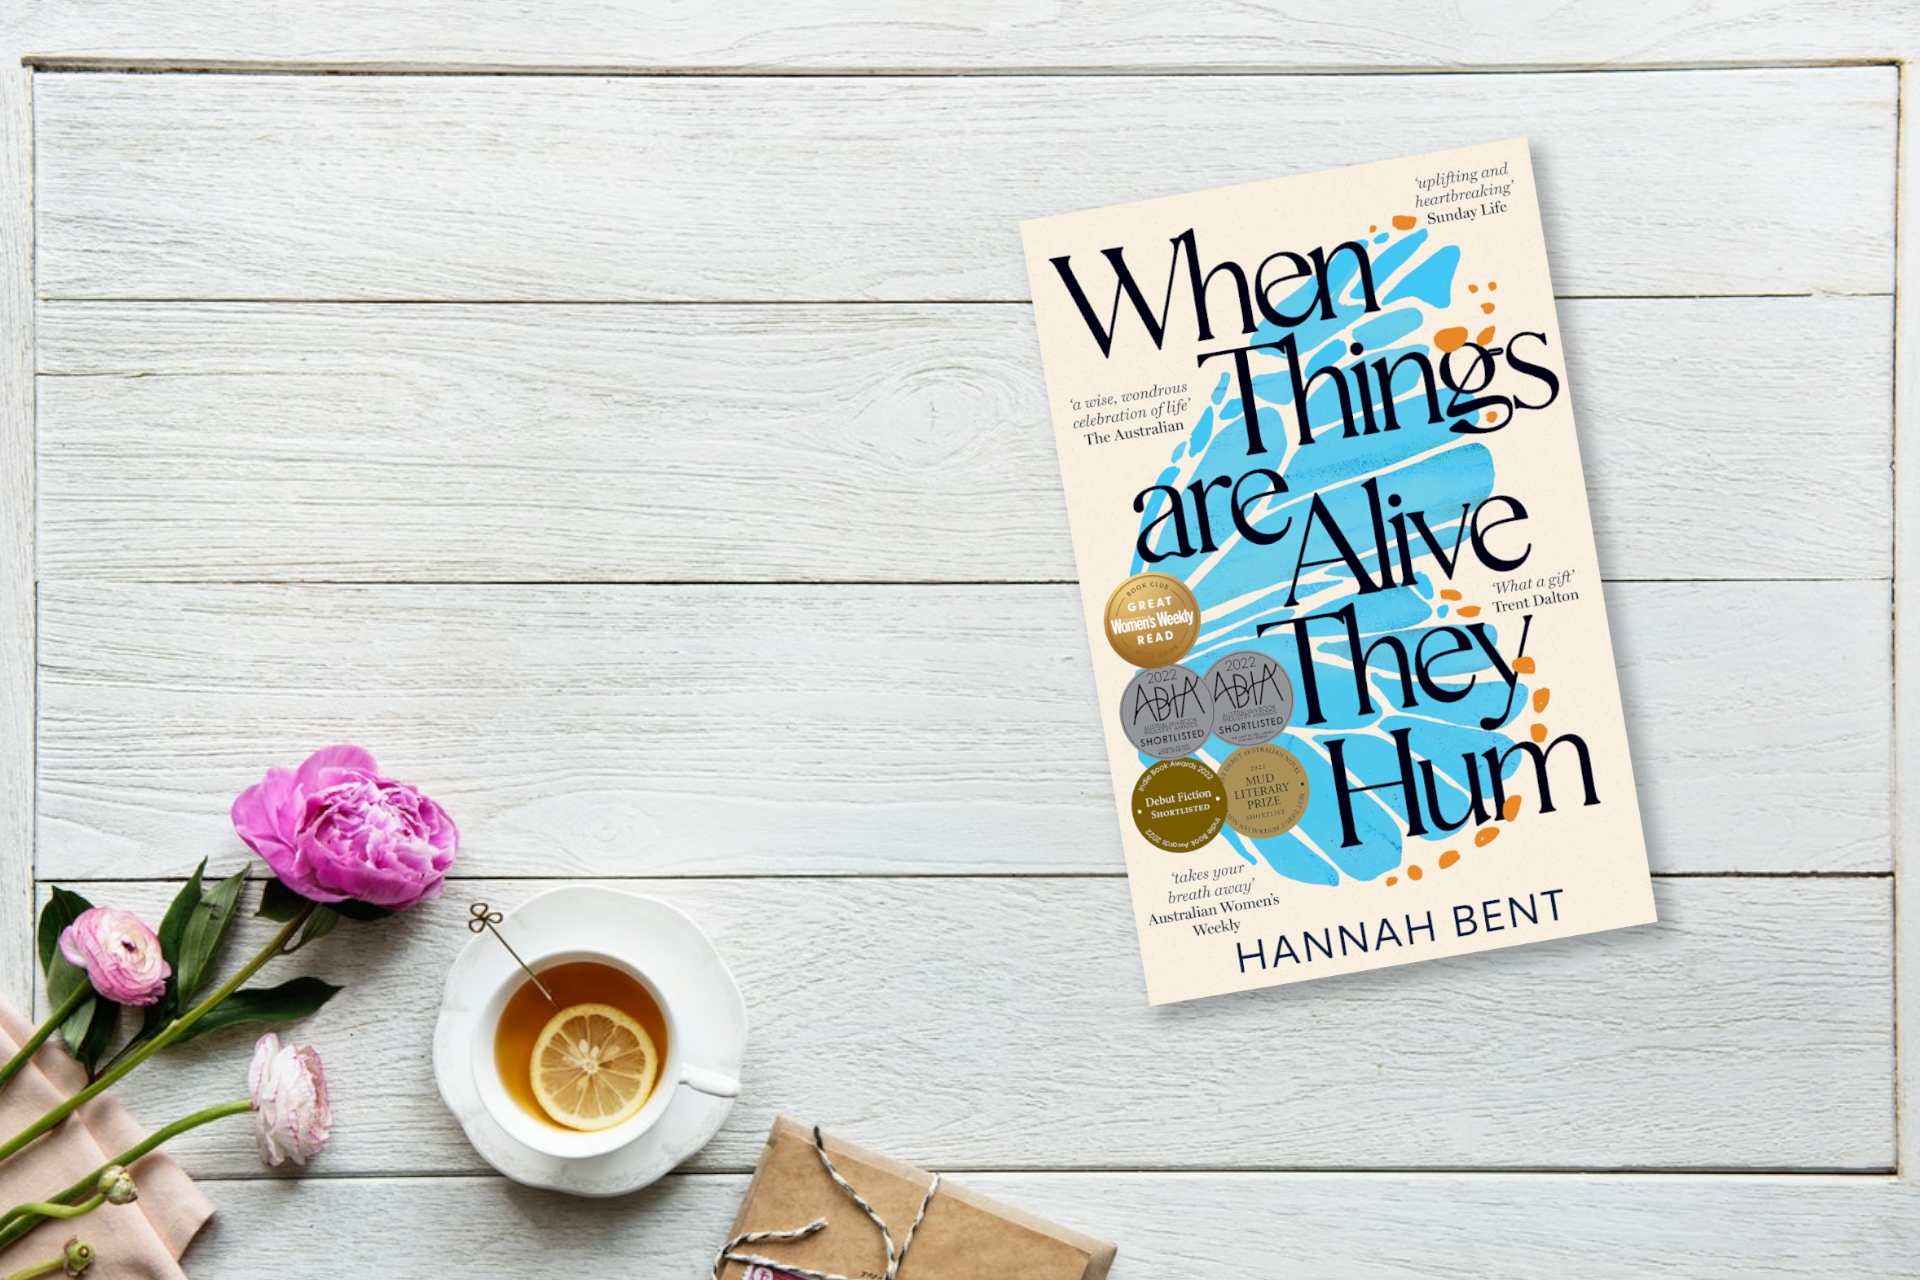 June 2023 Book Club Recommendation: When Things Are Alive They Hum by Hannah Bent